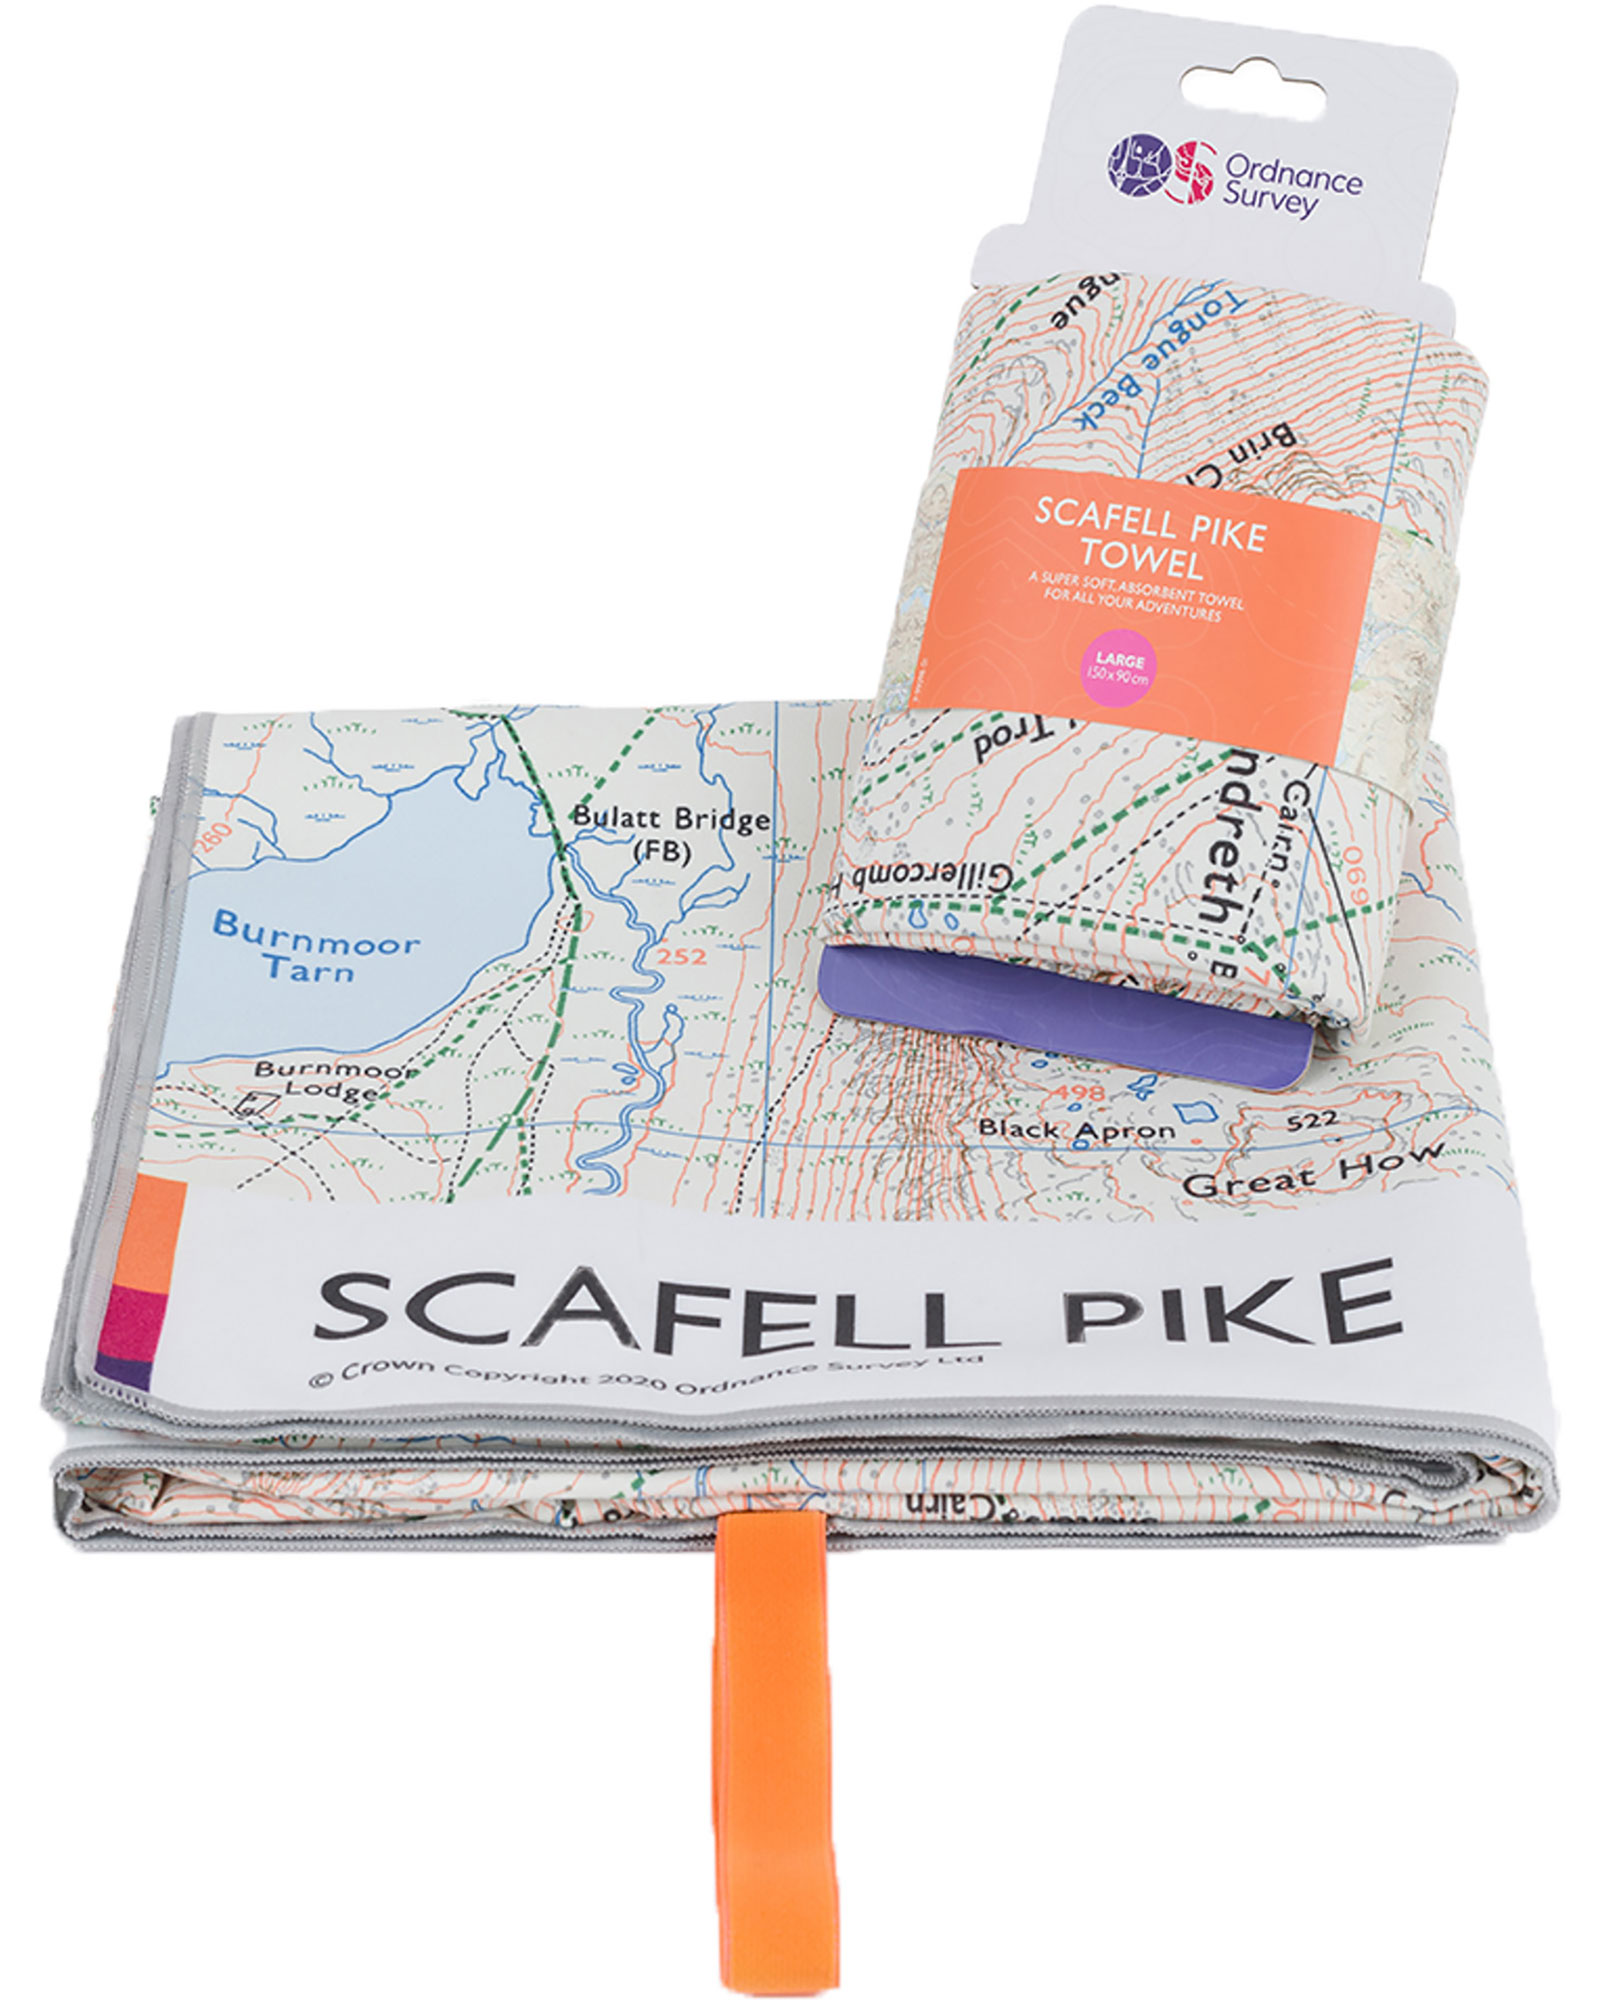 Product image of Ordnance Survey Large Microfibre Towel - Scafell Pike